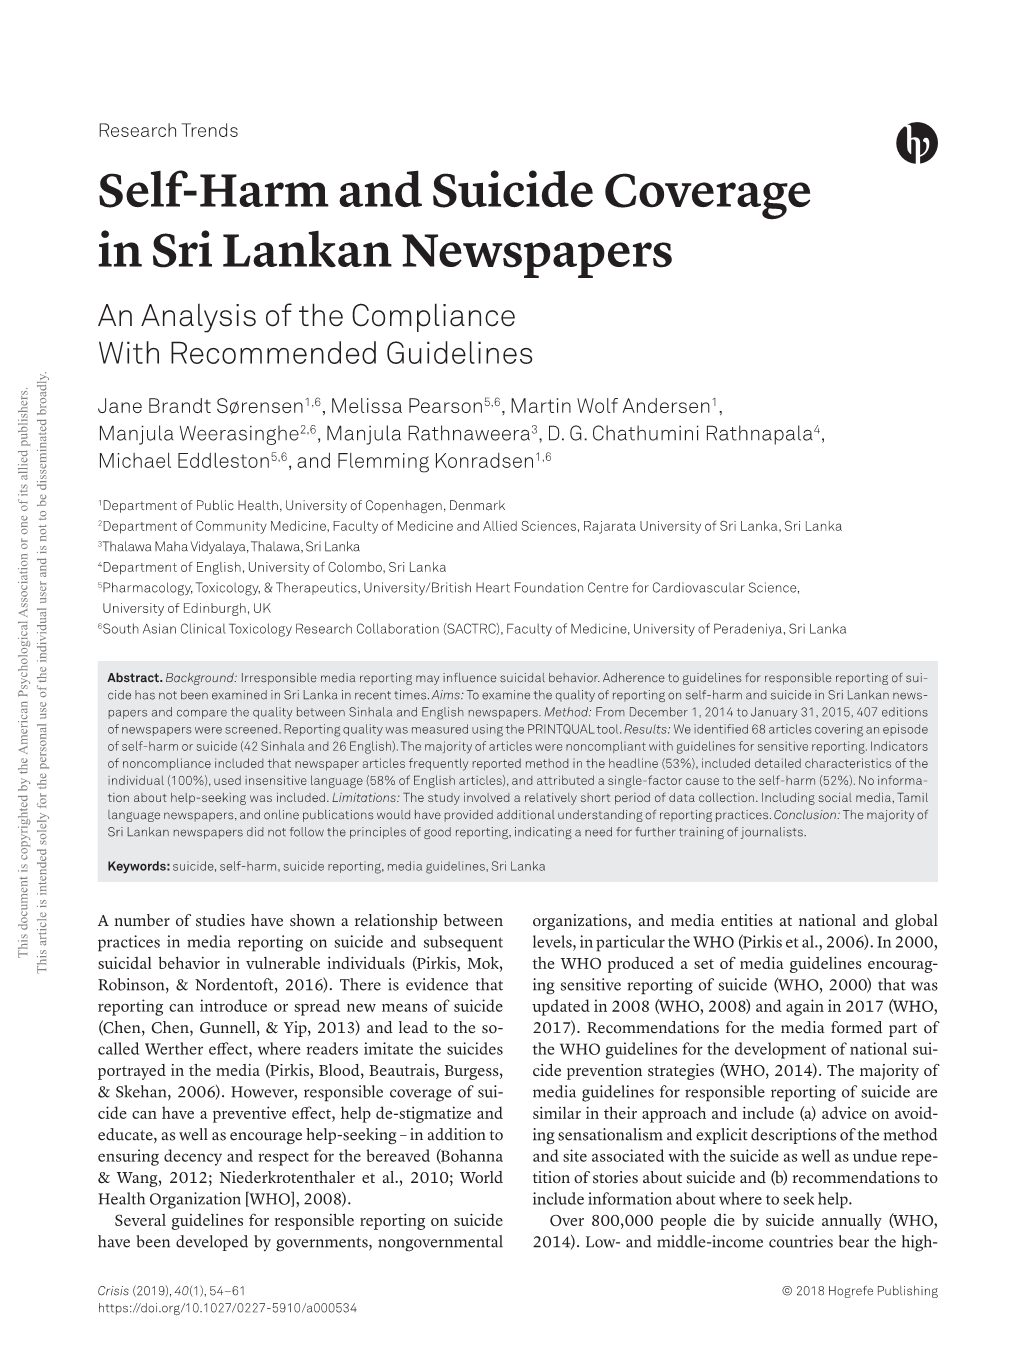 Self-Harm and Suicide Coverage in Sri Lankan Newspapers an Analysis of the Compliance with Recommended Guidelines